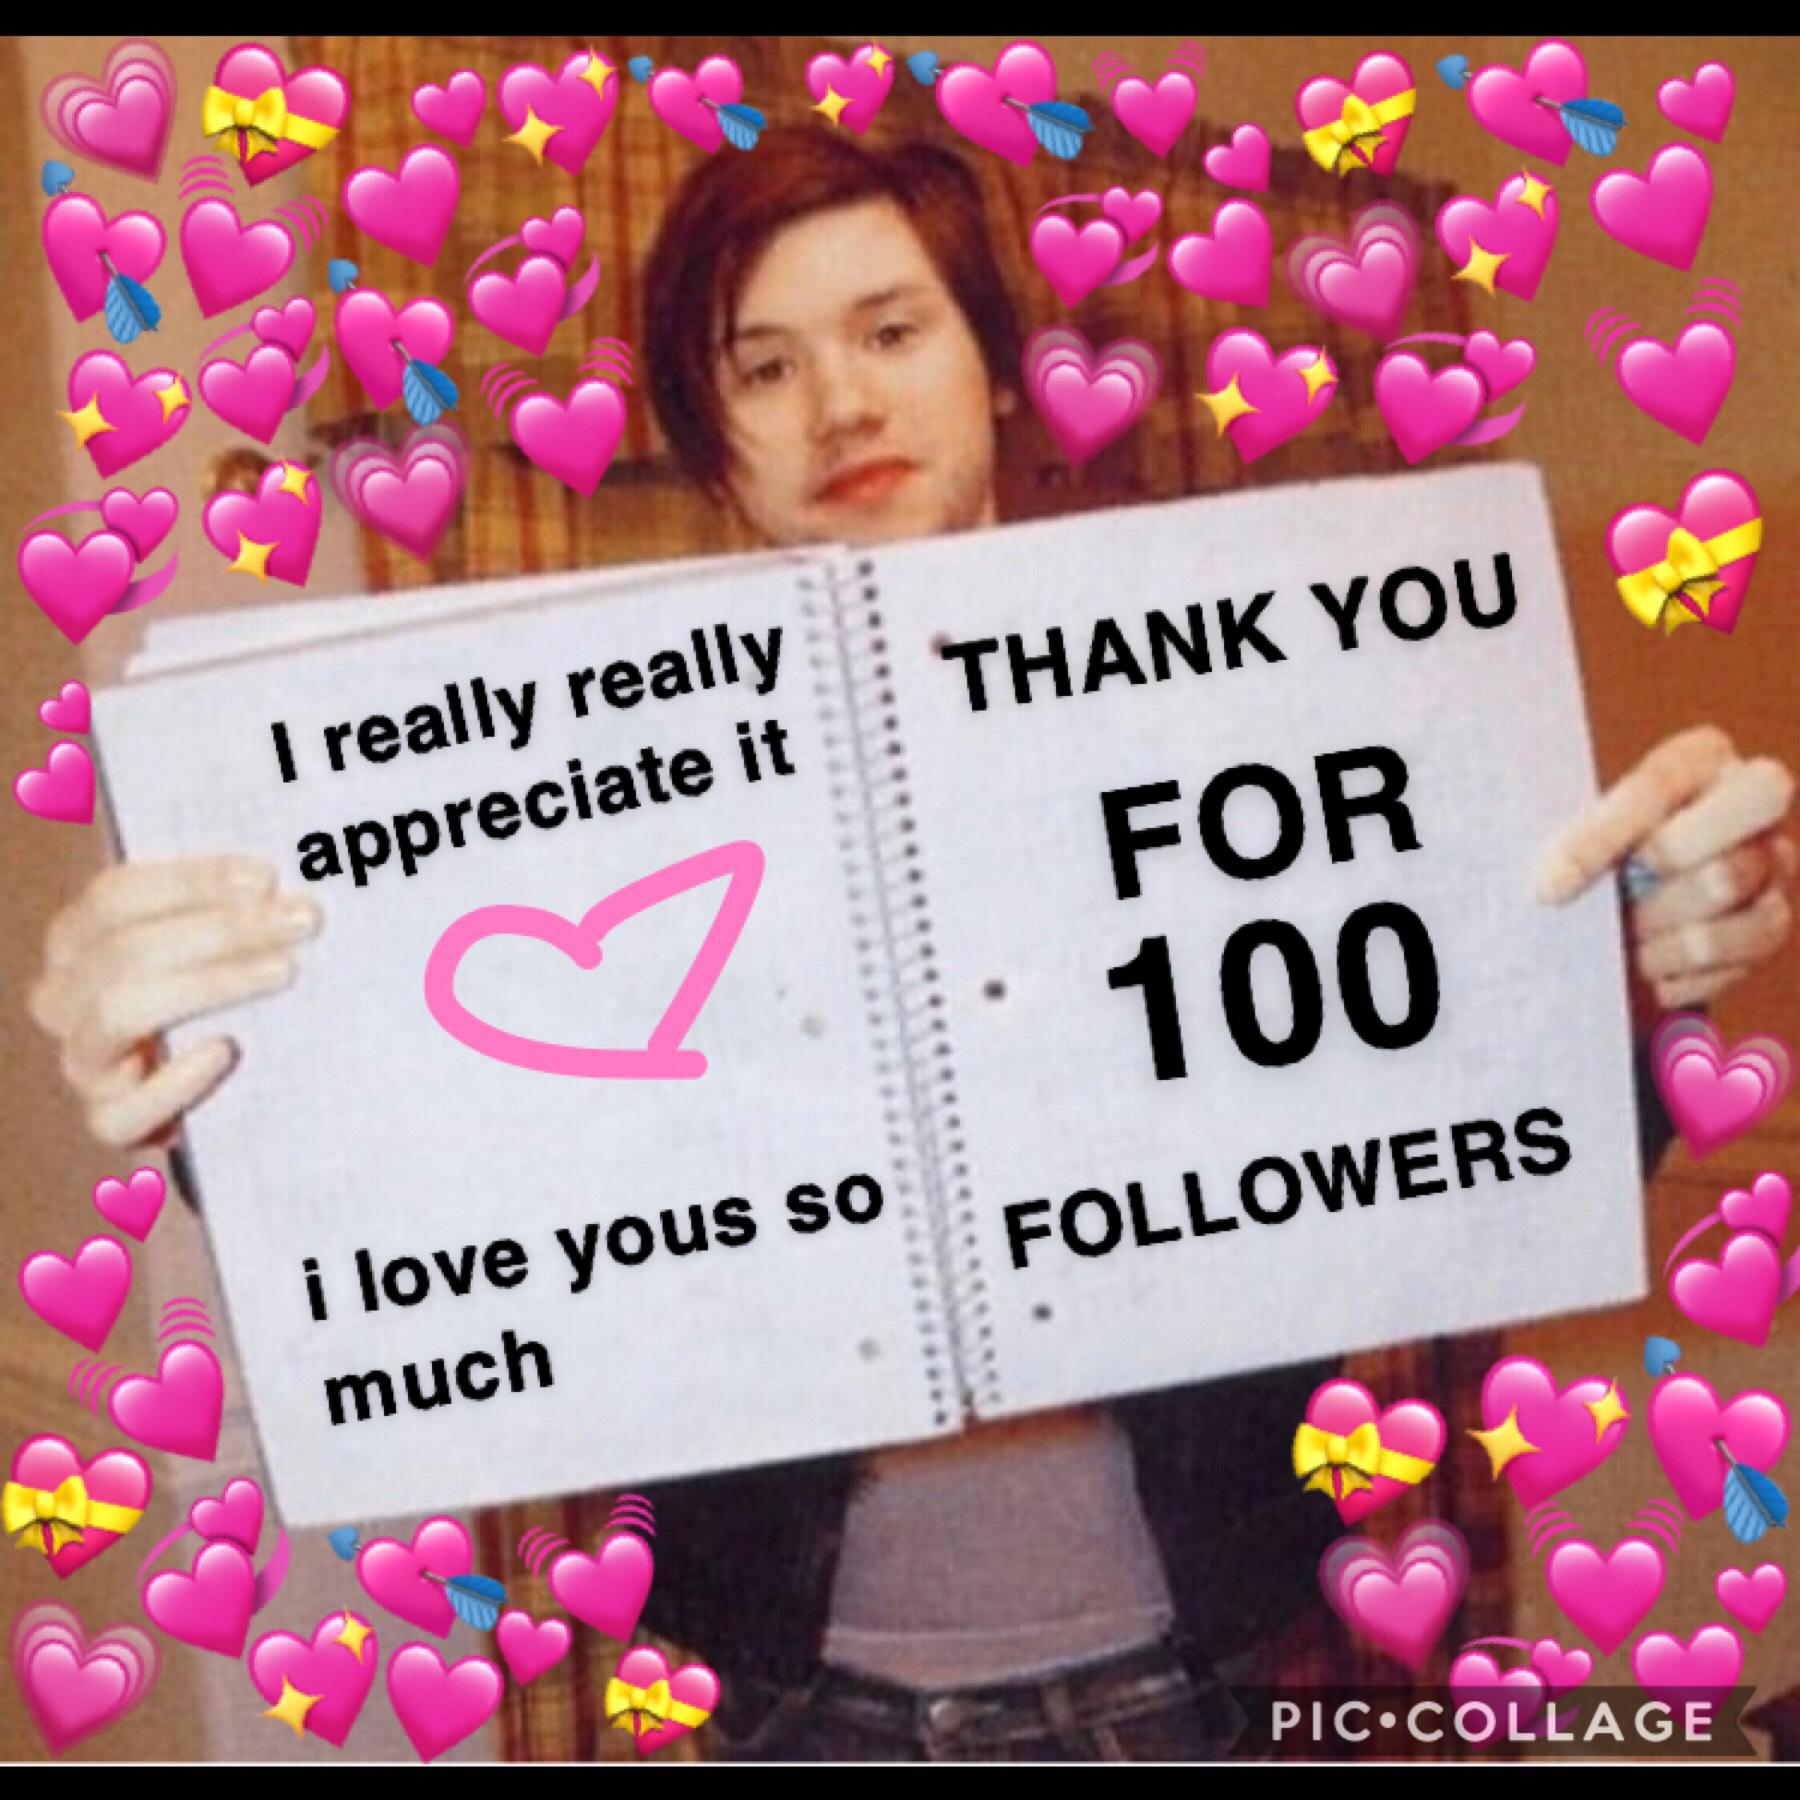 wow. i know 100 followers isn’t a lot but I really really appreciate it. I started my account a few months ago just because I was bored. but overtime i have met the nicest people ever and have really improved in my collages. thank you all for supporting m